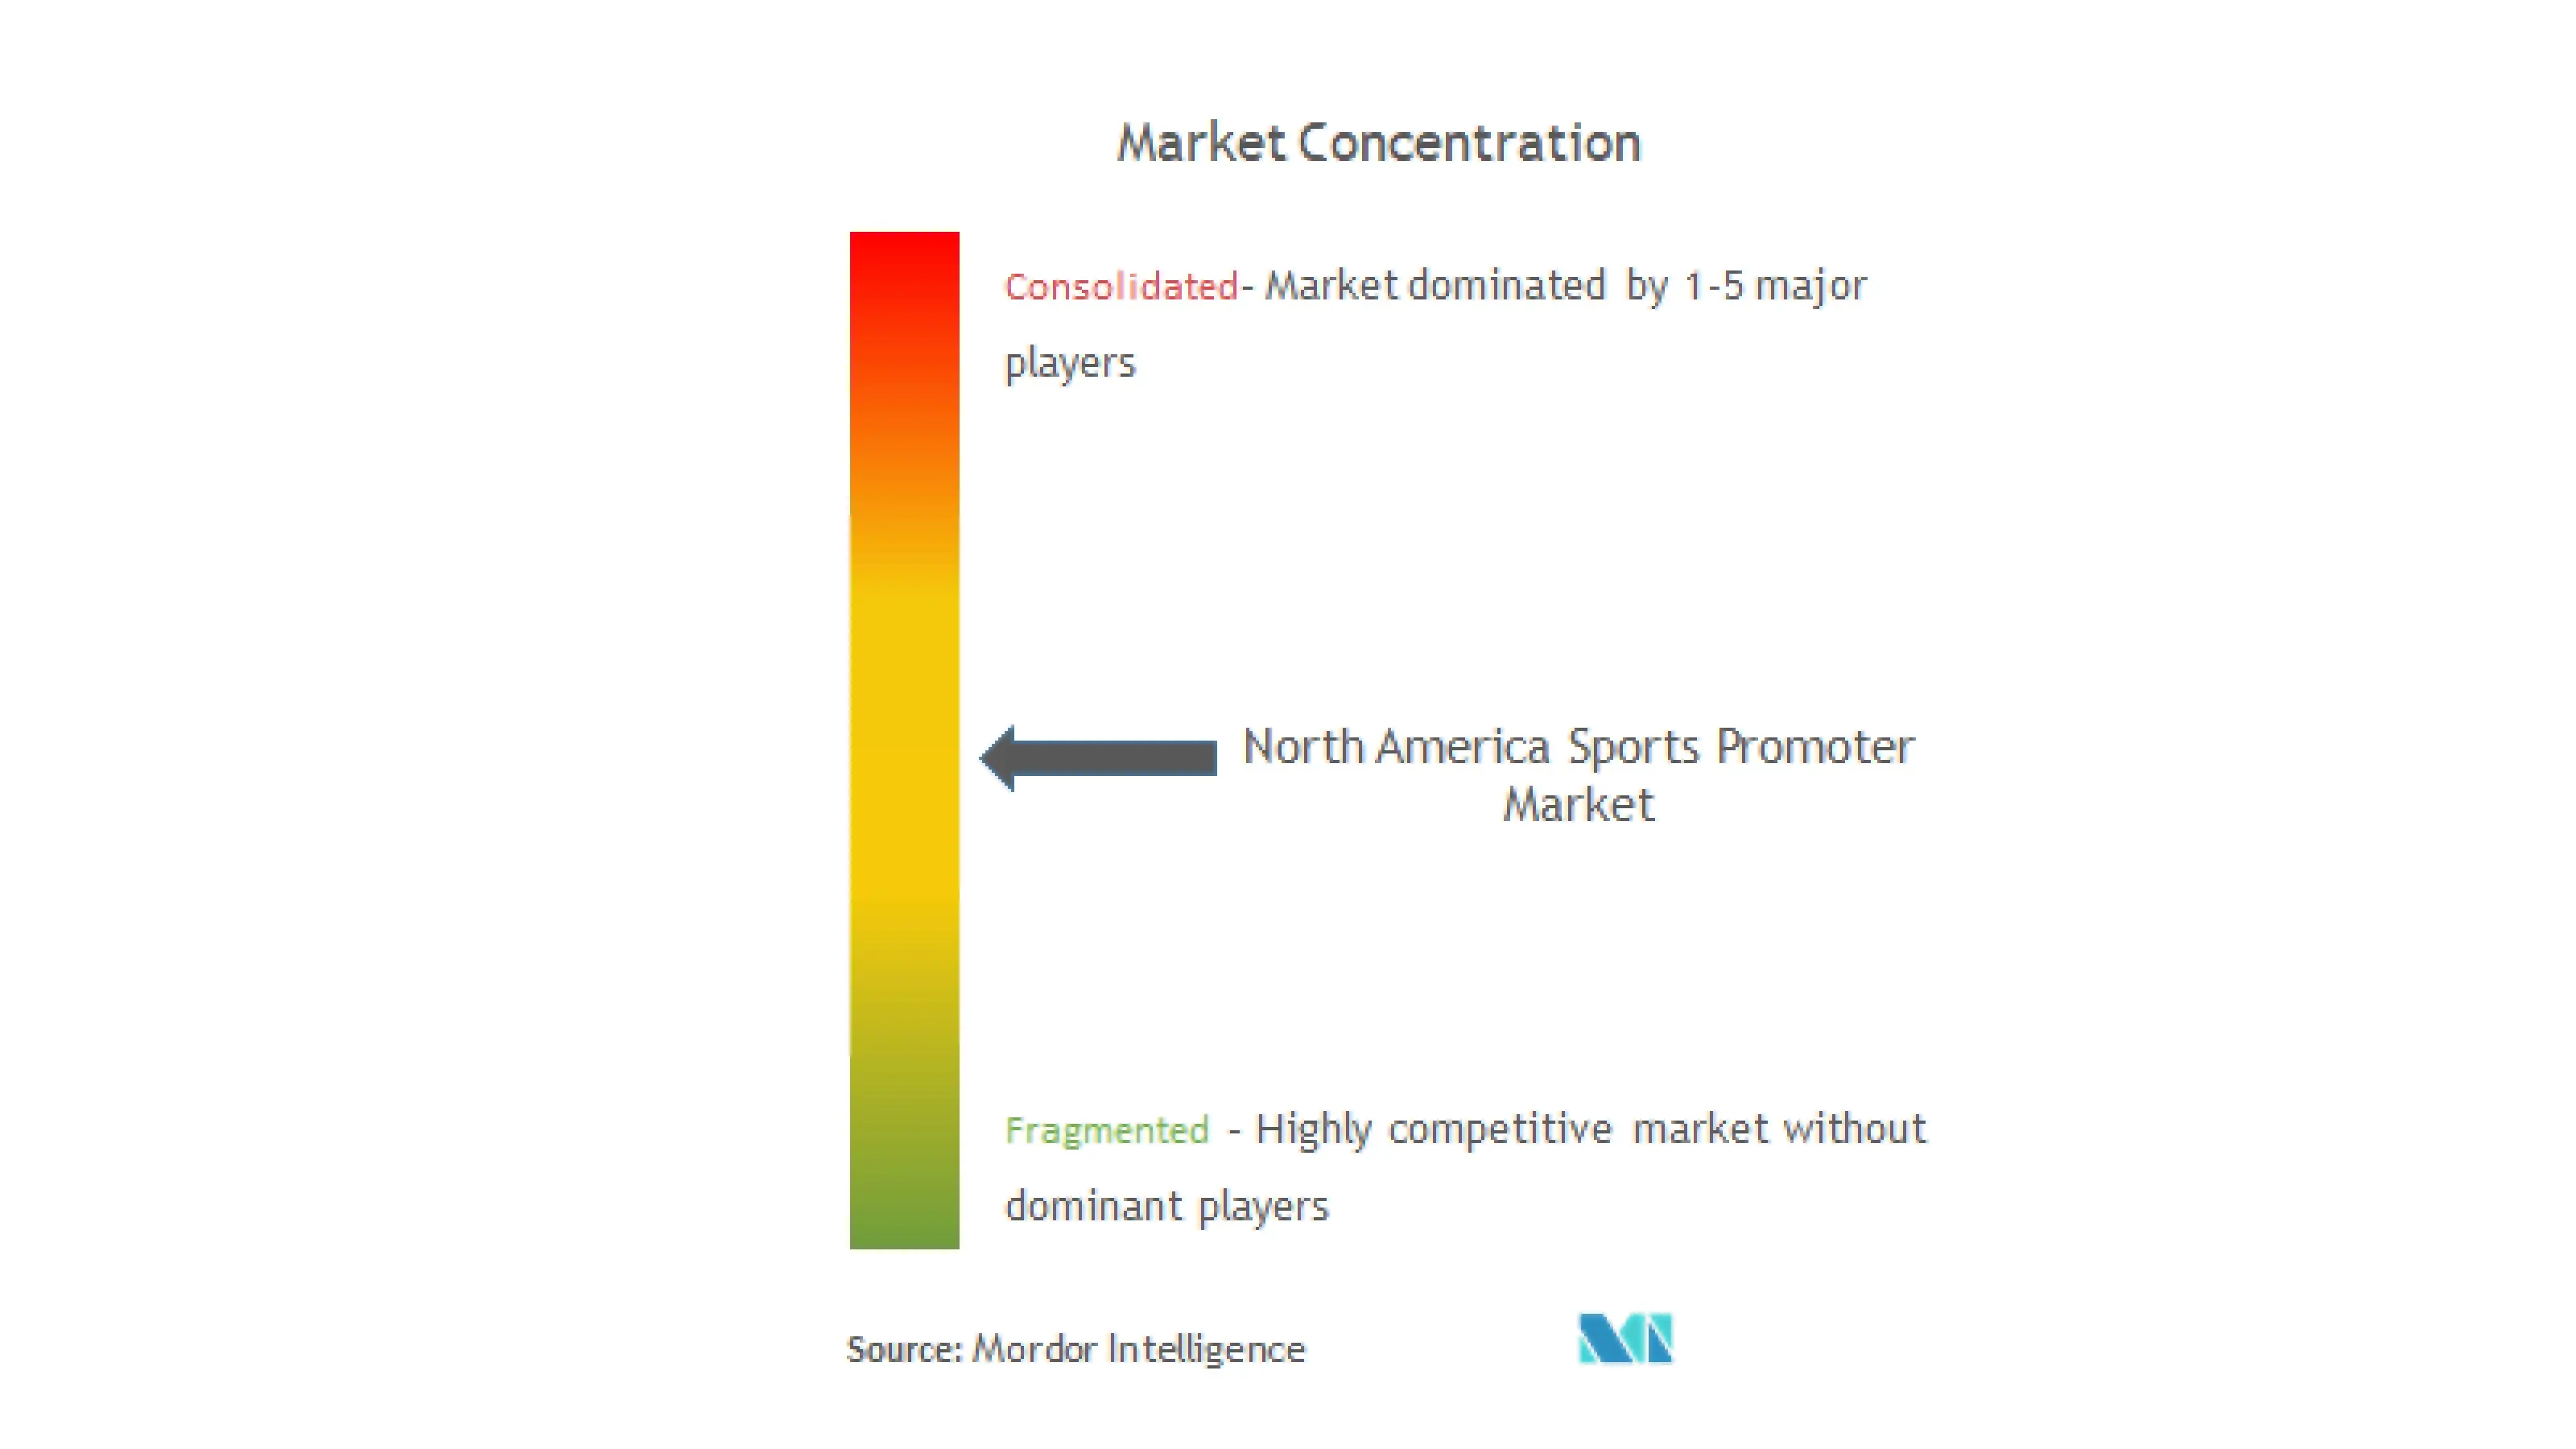 North America Sports Promoter Market Concentration